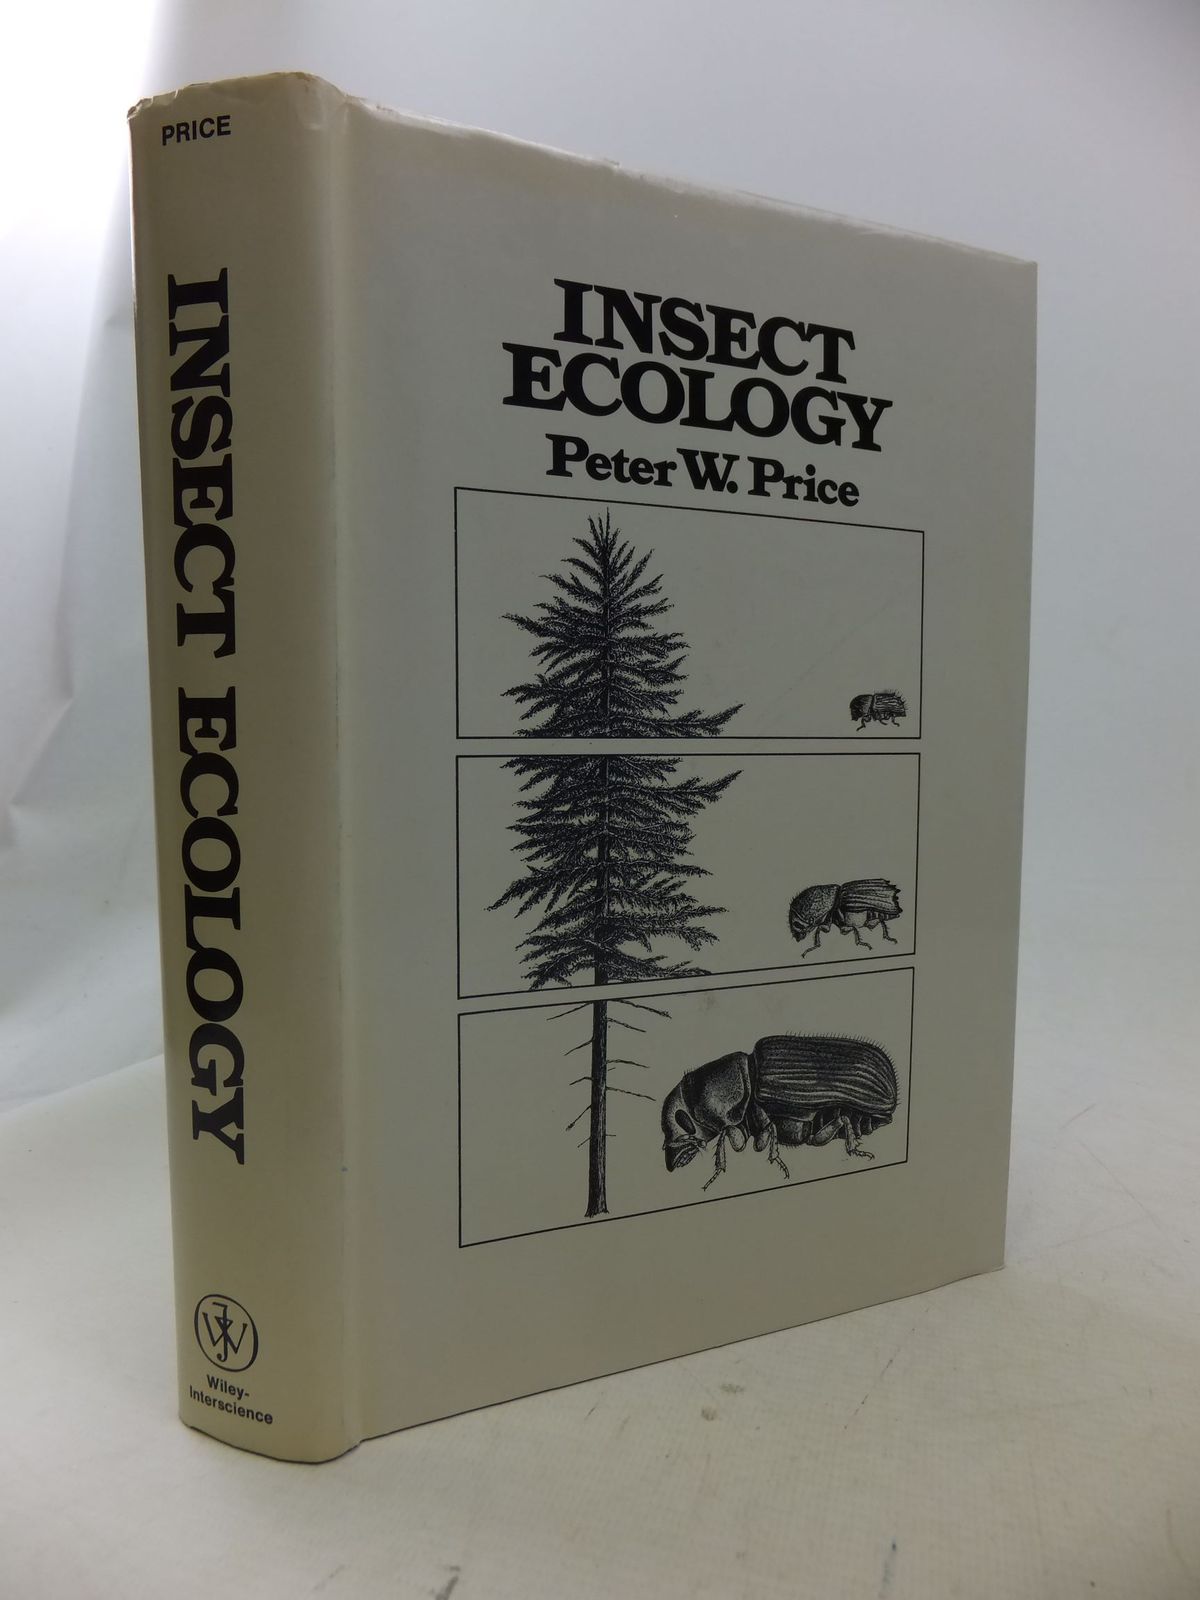 Photo of INSECT ECOLOGY written by Price, Peter W. published by Wiley-Interscience (STOCK CODE: 1710851)  for sale by Stella & Rose's Books